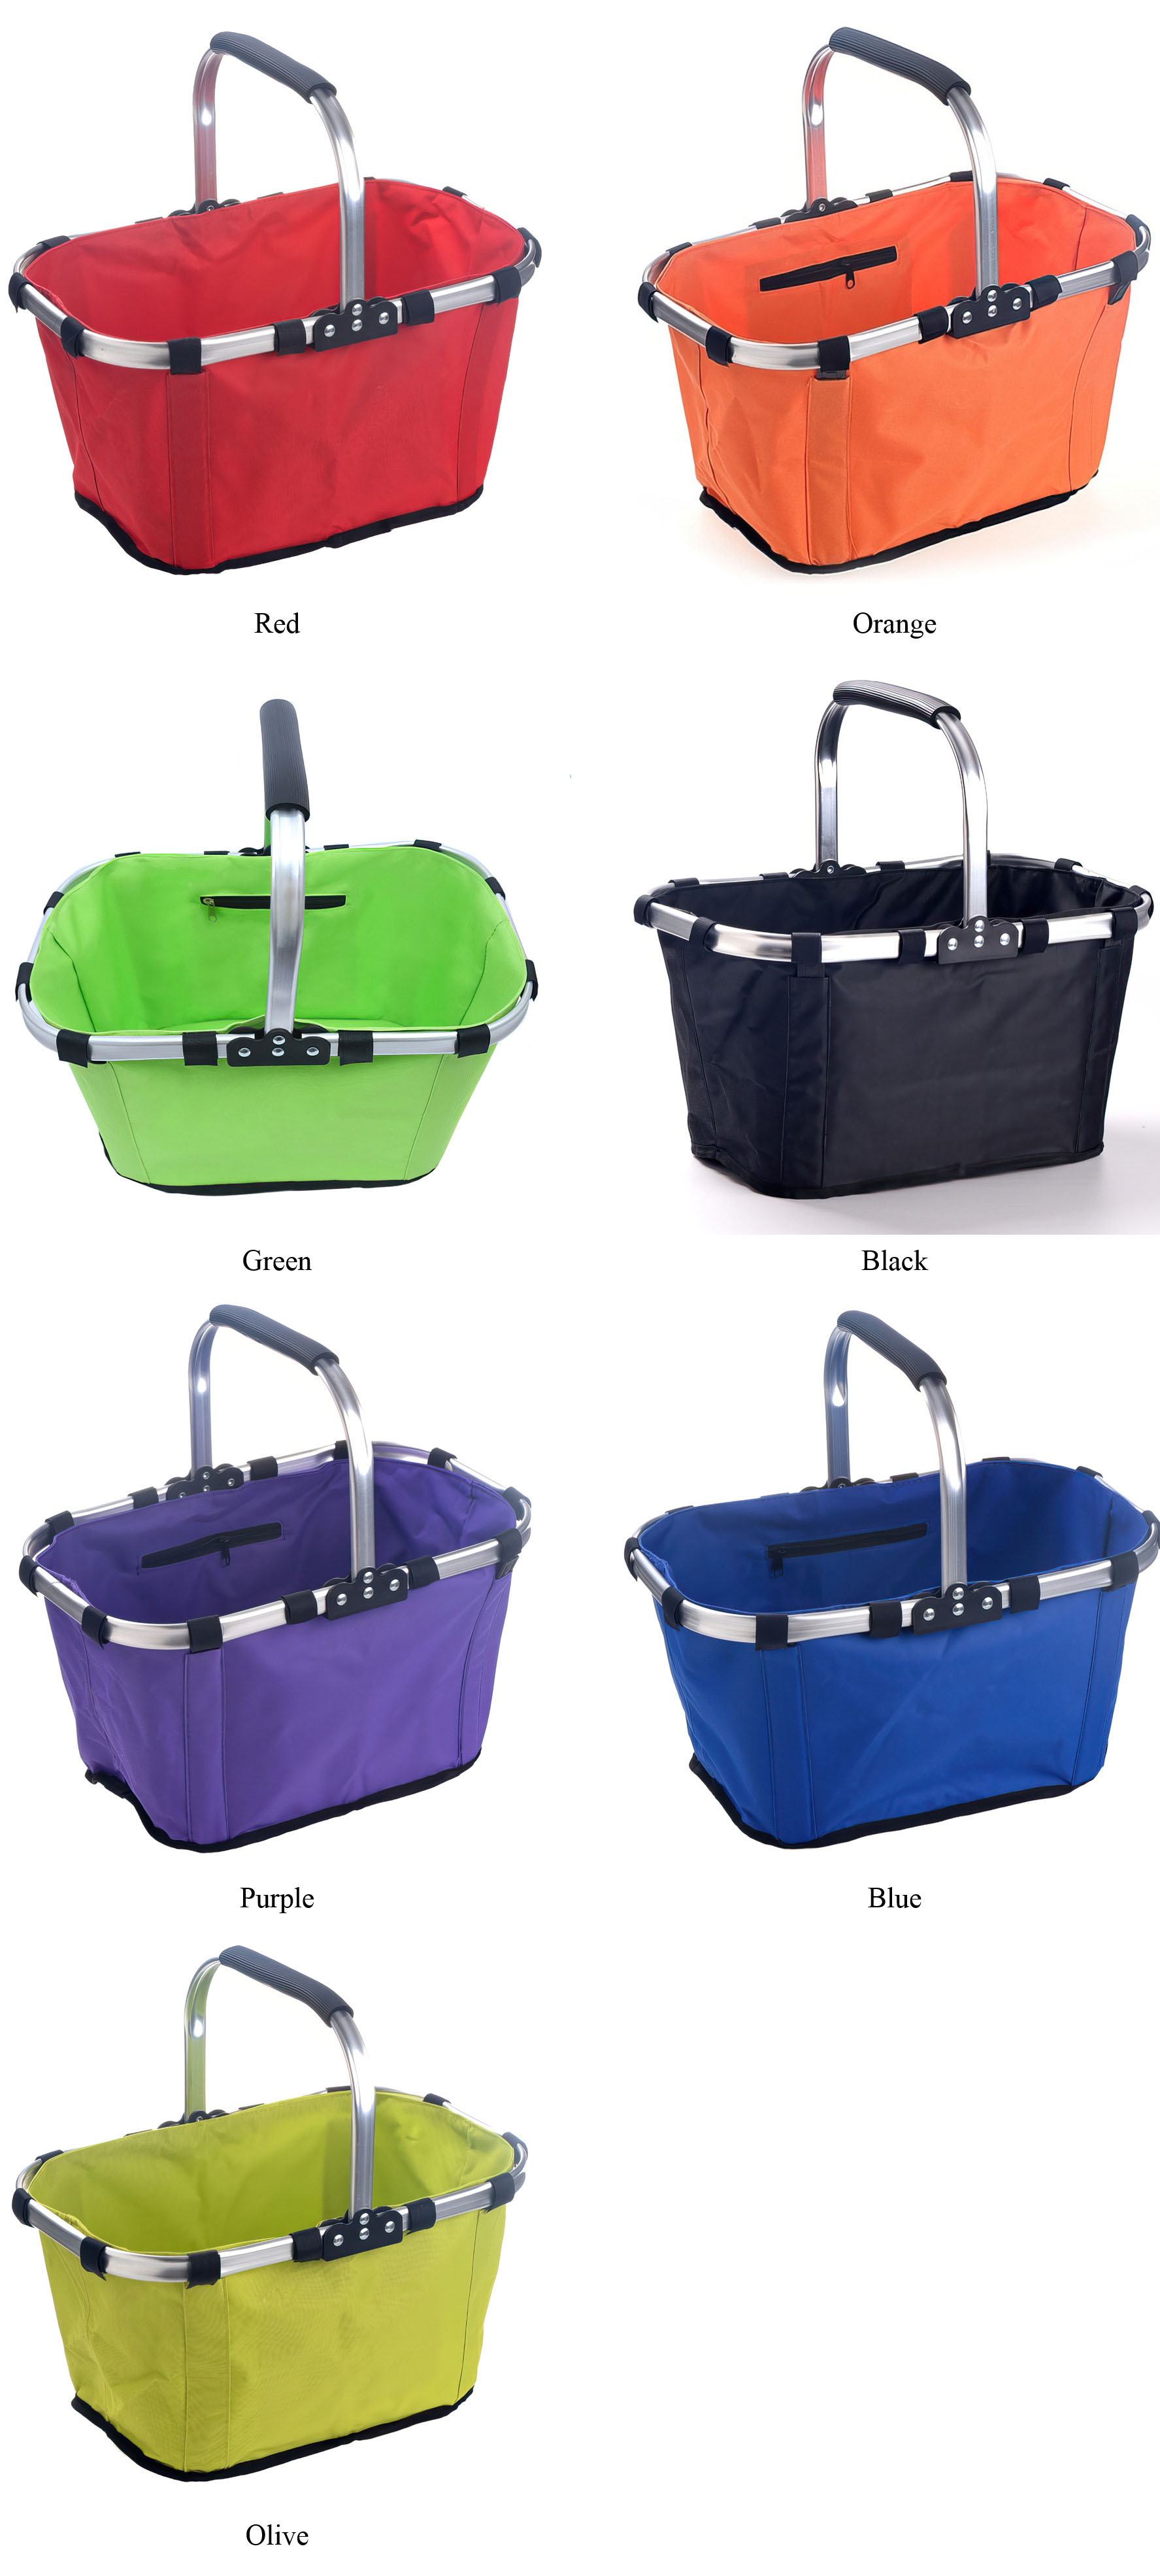 Collapsible Market Tote Basket Wholesale, Stocked Sizes and Colors.